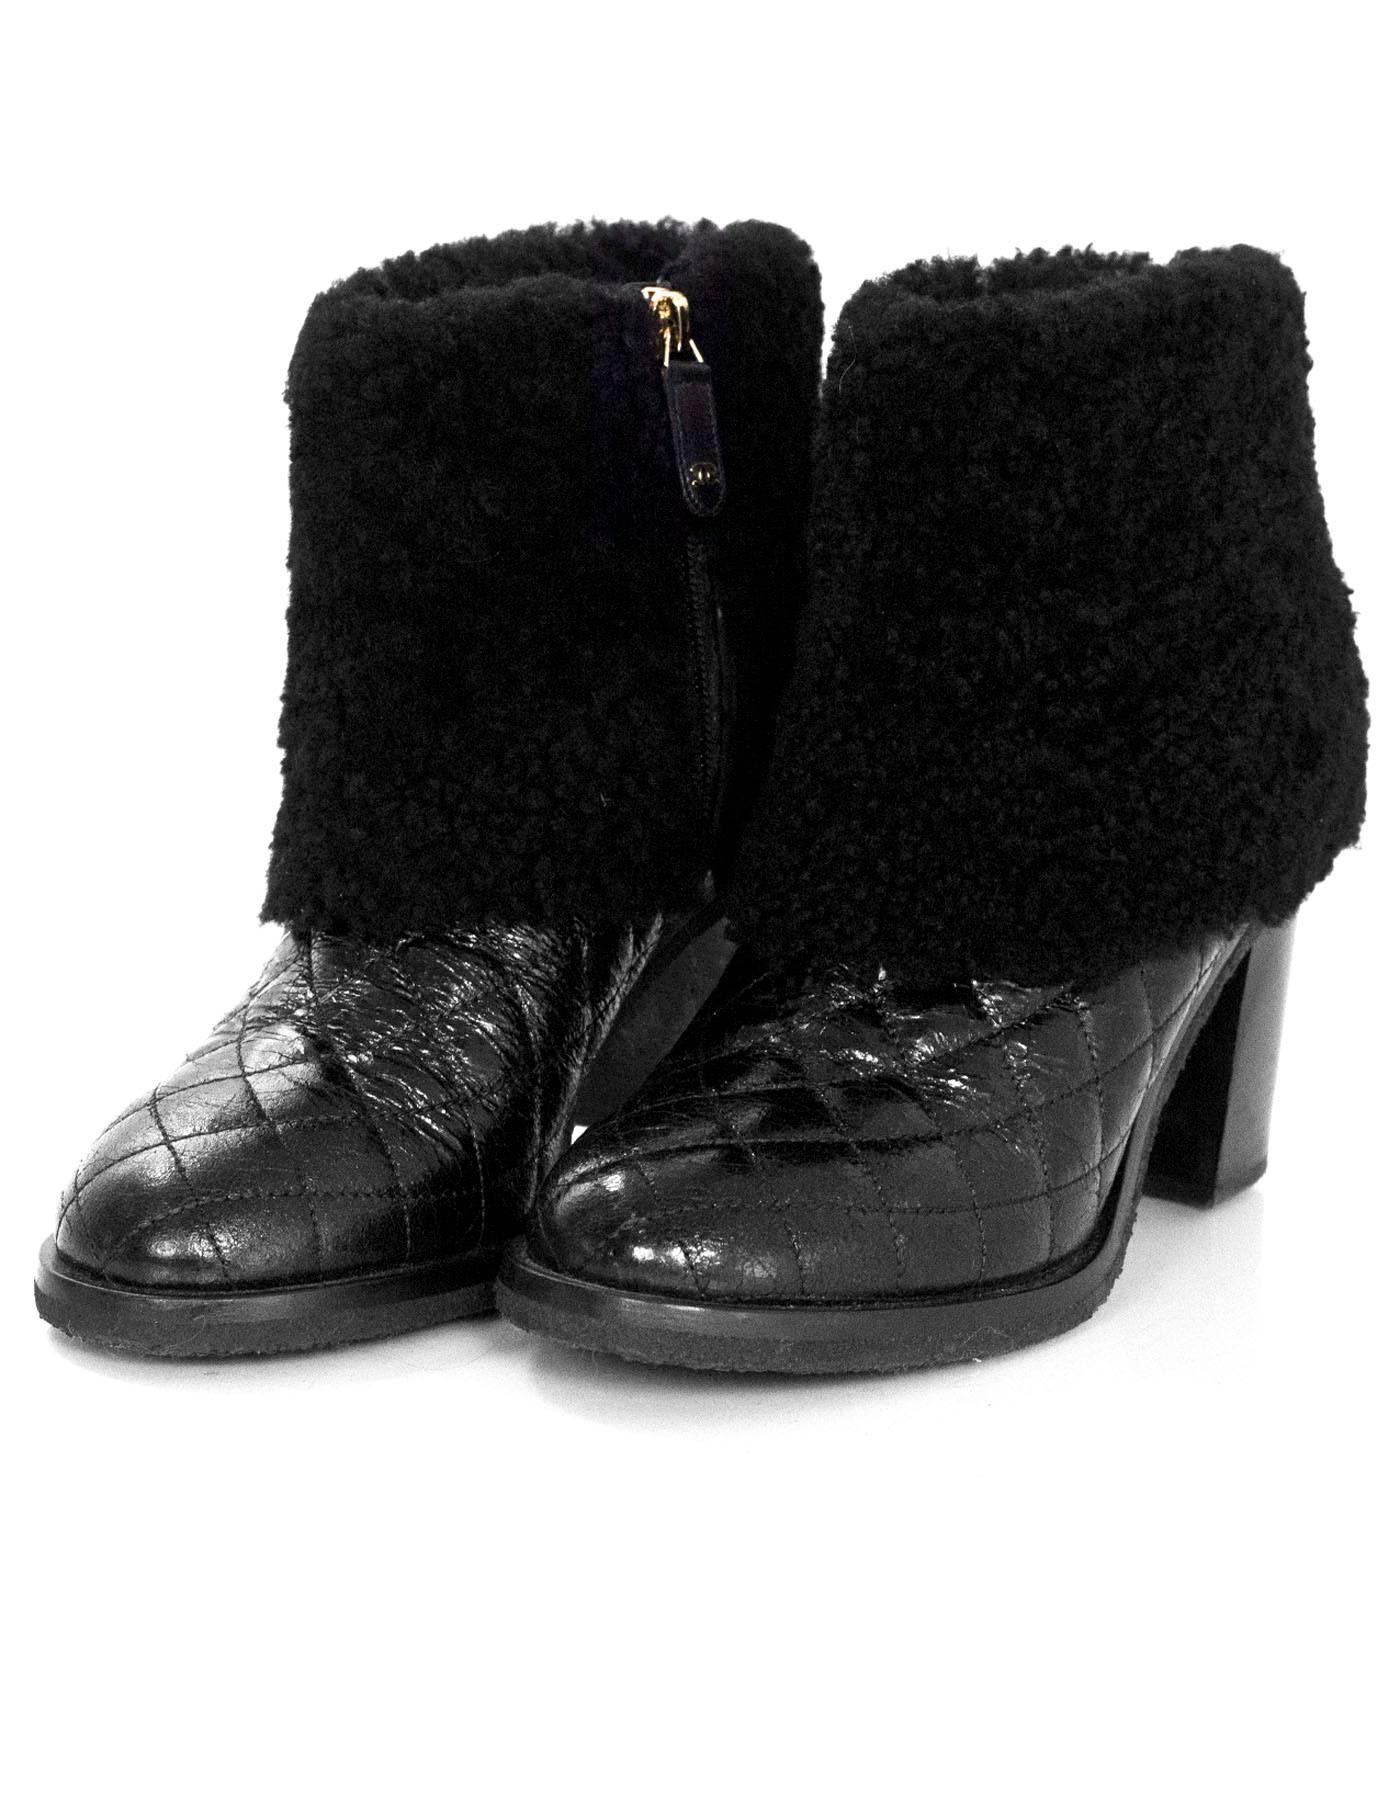 Chanel Black Quilted Shearling Ankle Boots Sz 37

Made In: Italy
Color: Black
Materials: Shearling, leather
Closure/Opening: Side zip closure 
Sole Stamp: Chanel Made in Italy 37
Overall Condition: Excellent pre-owned condition with the exception of